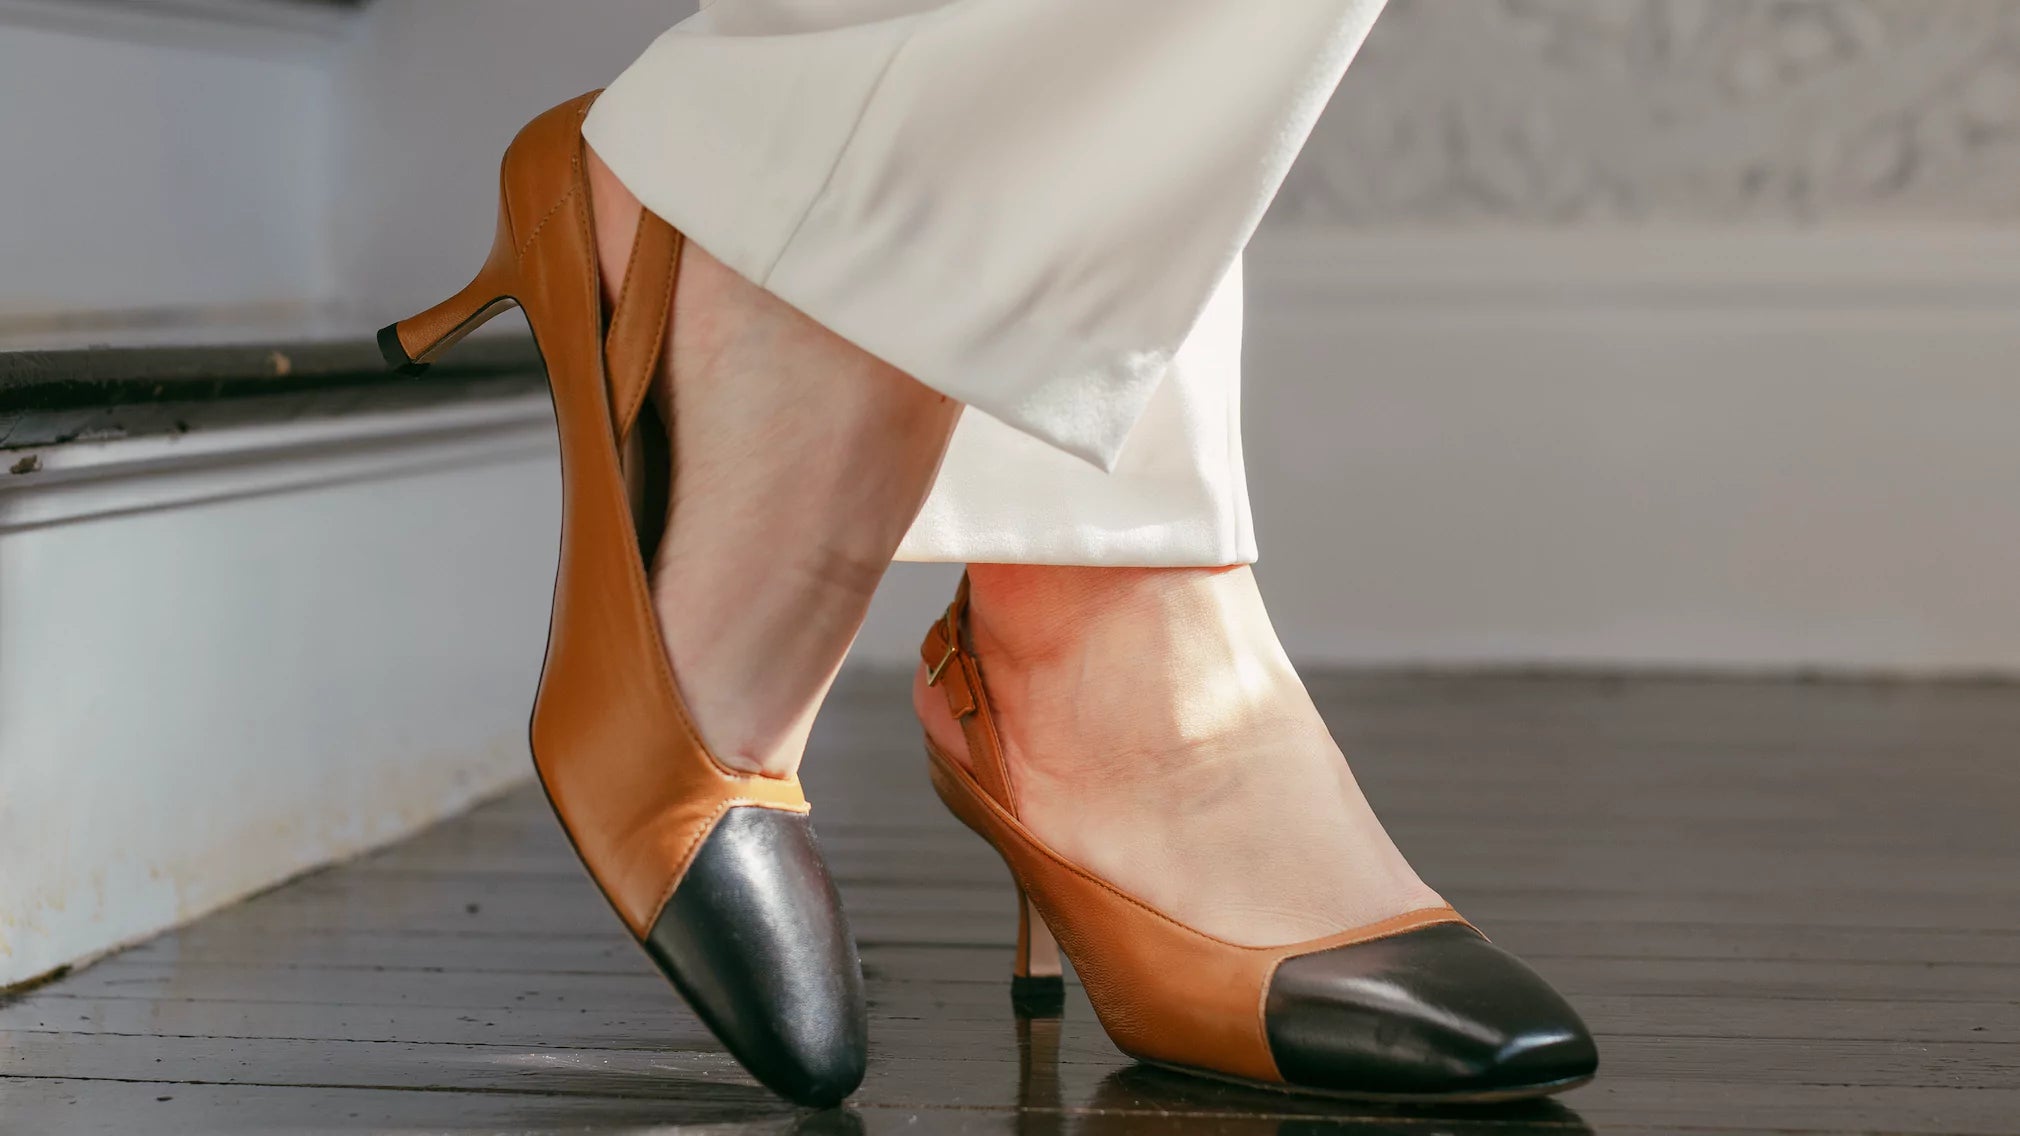 Stepping Confidently: Finding the Best Heels to Walk In